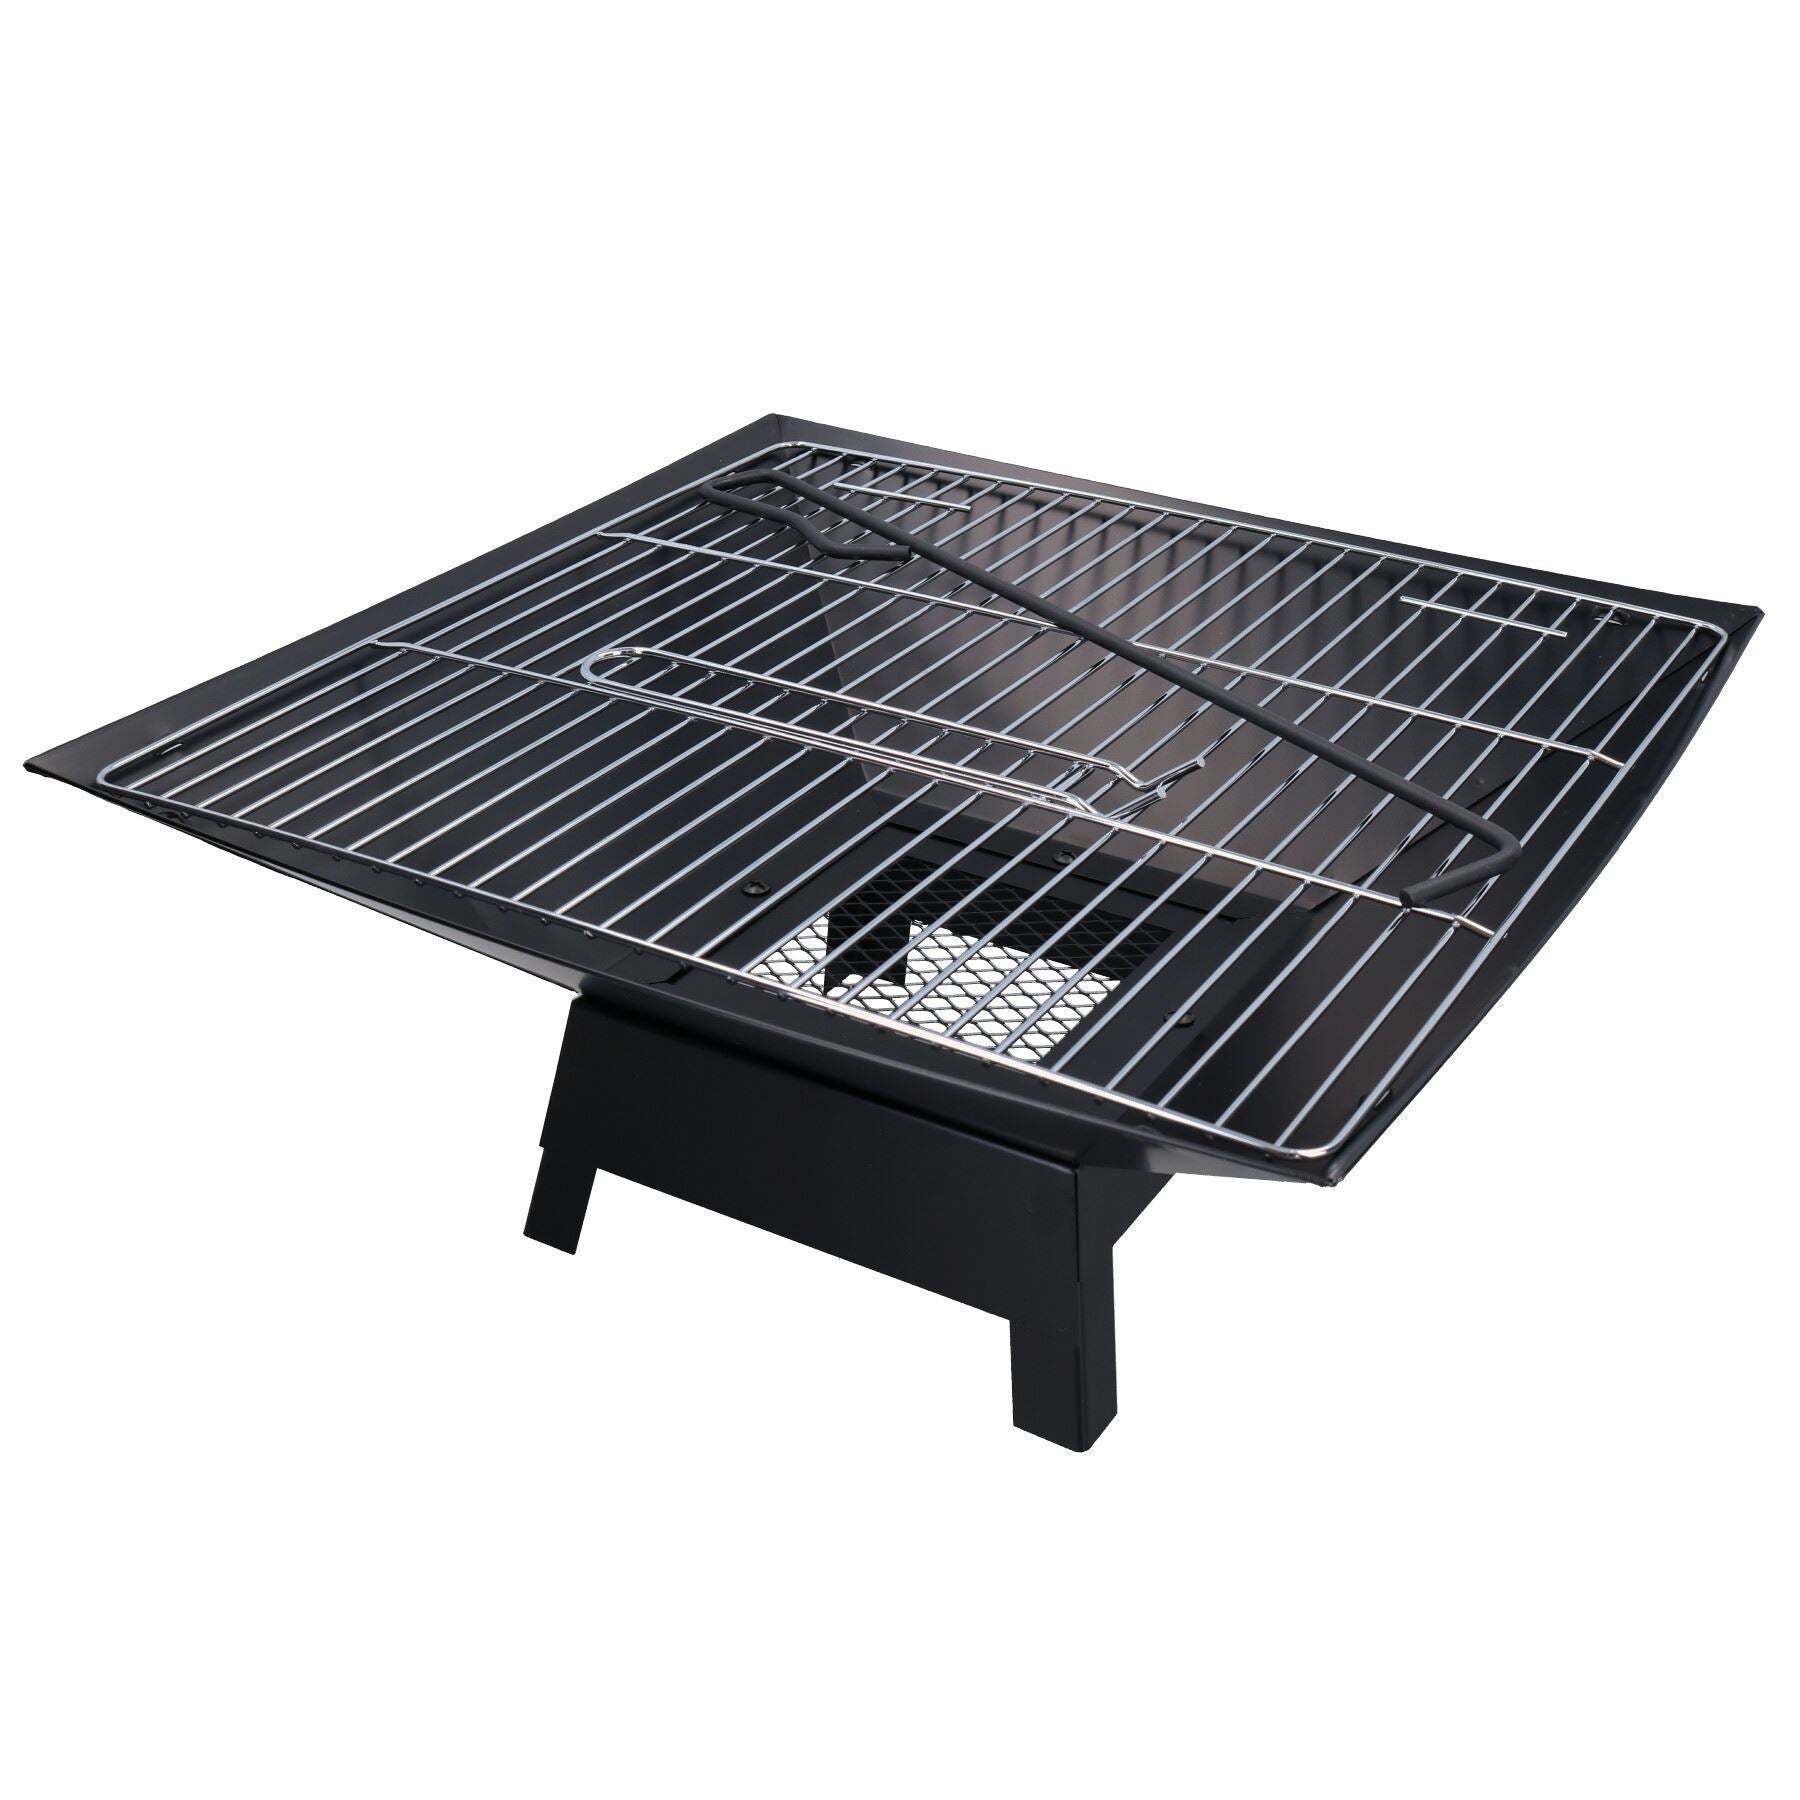 Authentic Flame Grill Barbecue Griddle Fire Pit Patio Heater Brazier BBQ